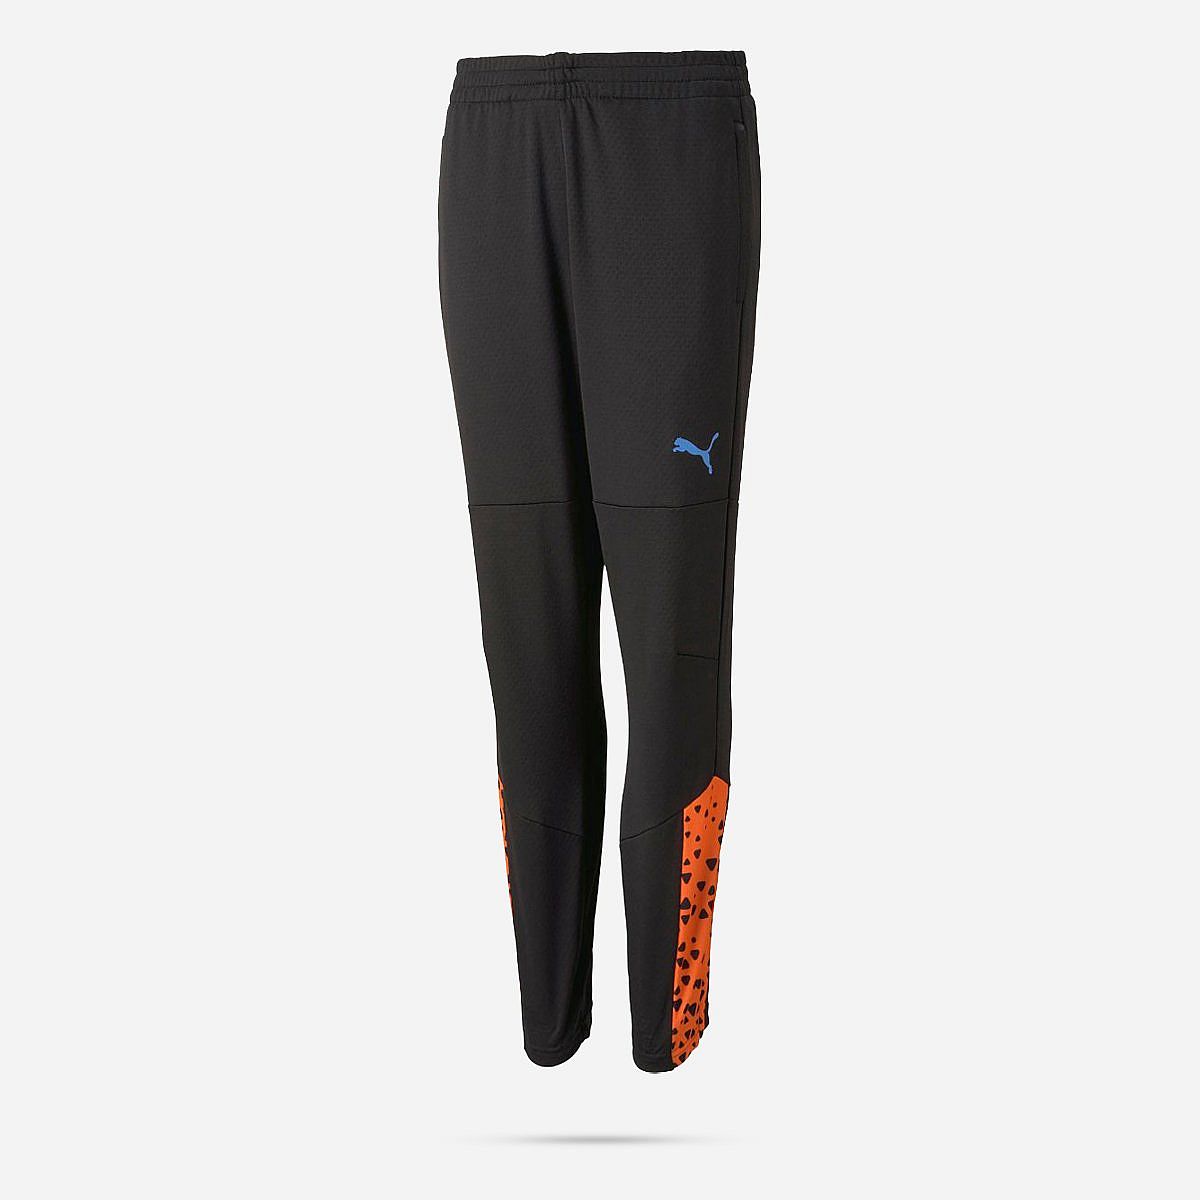 AN296452 Individualcup Training Pants